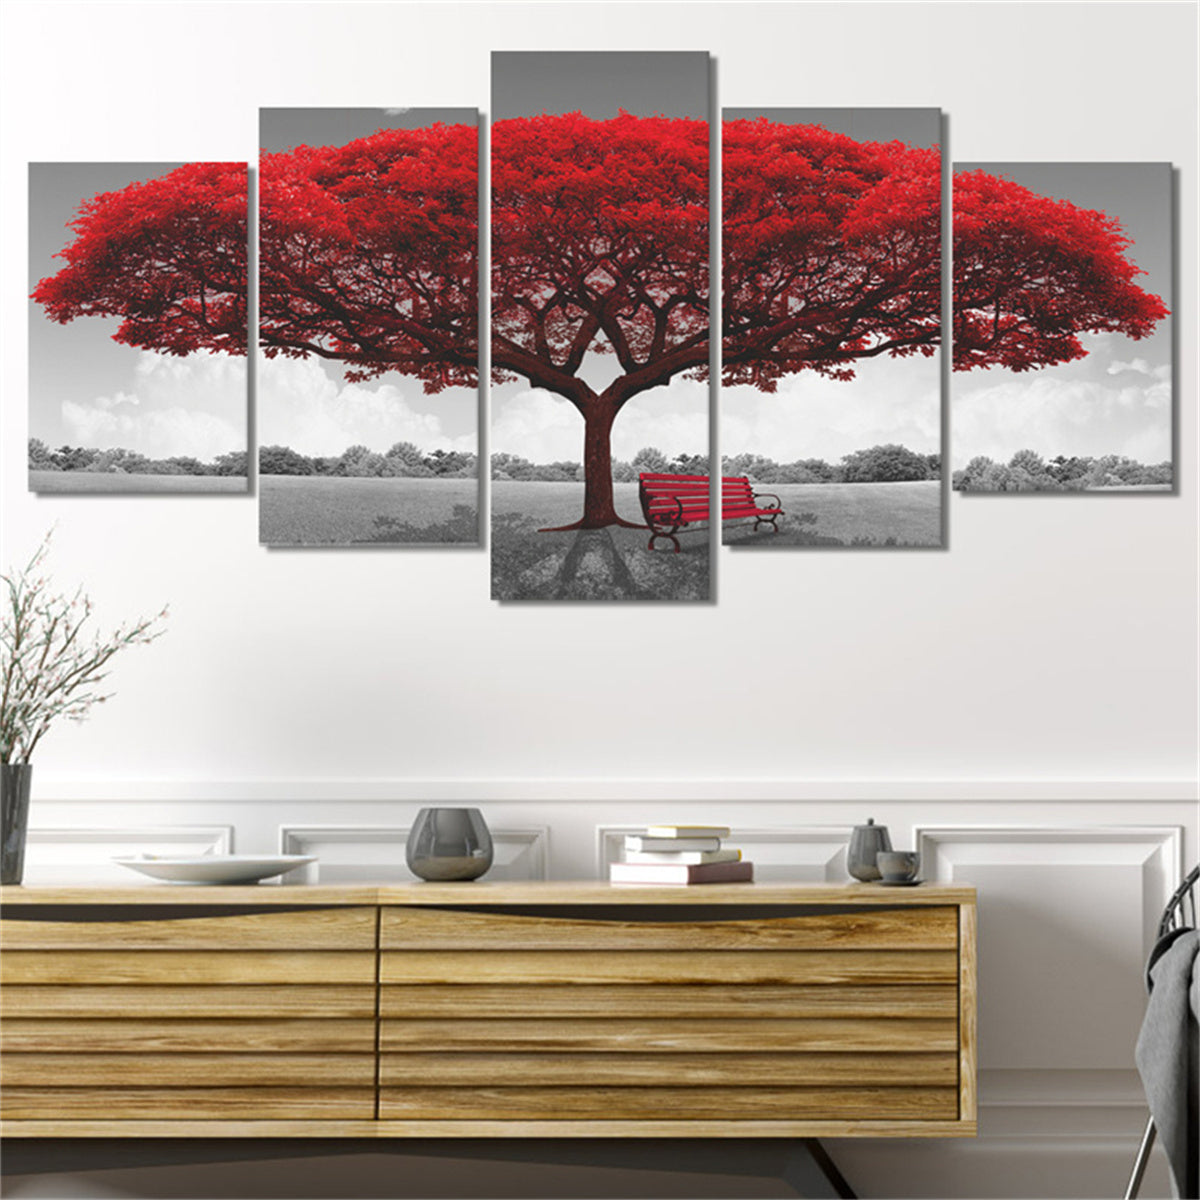 5pcs Frameless Red Benches Under The Big Tree Wall Art Painting Set